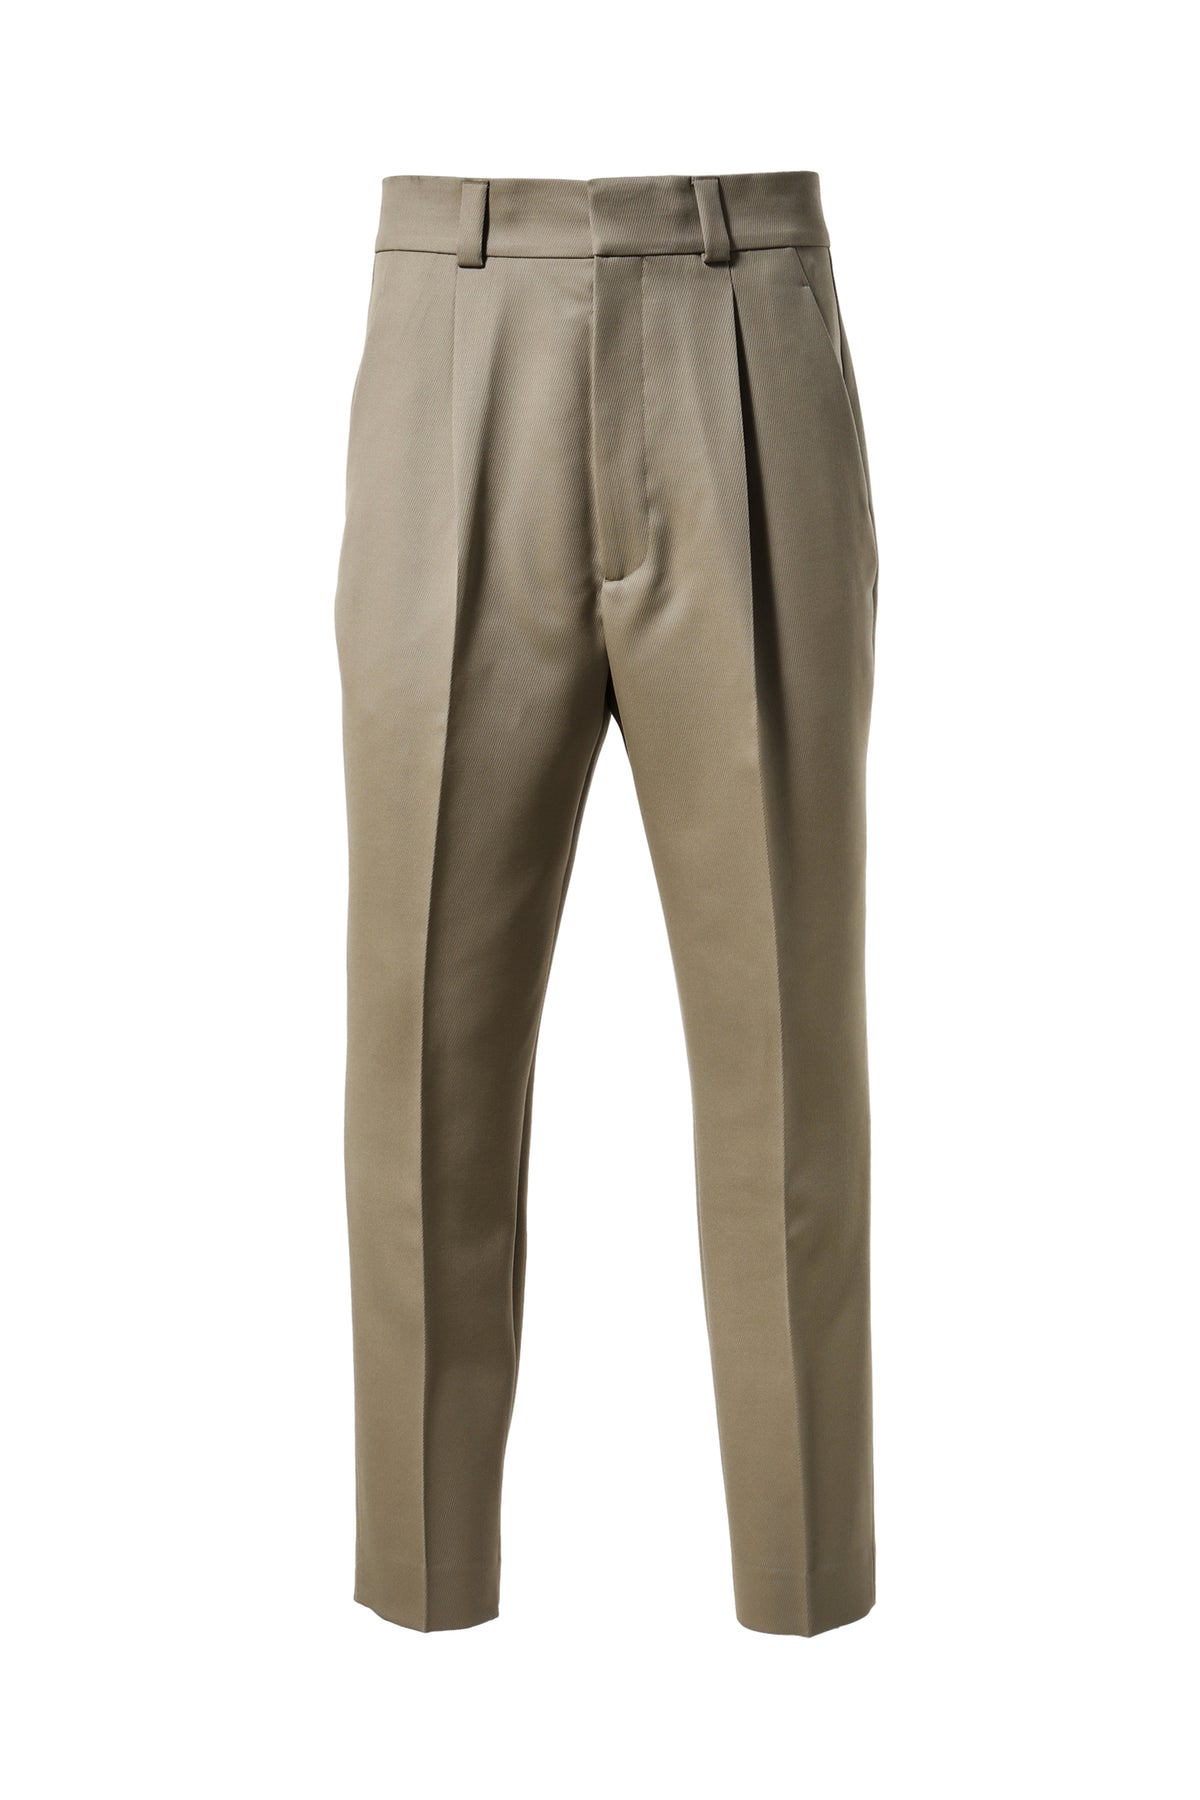 FEAR OF GOD THE ETERNAL COLLECTION ETERNAL CAV TWILL SUIT PANT / DUSTY BEI